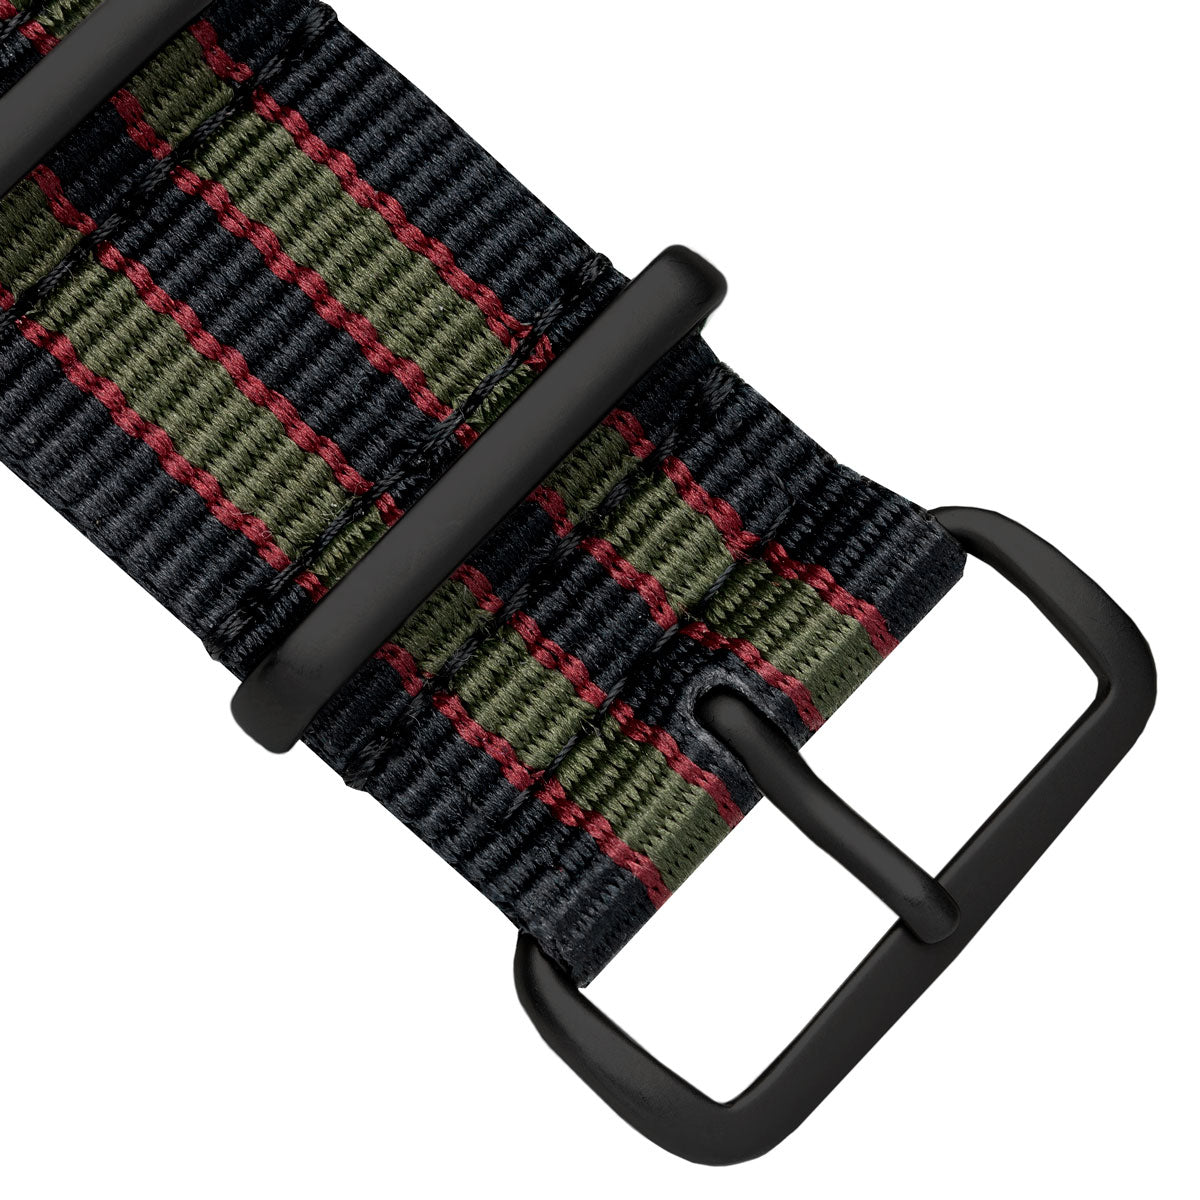 Colossal replacement belt straps for 45mm close end buckle – AQUILA®